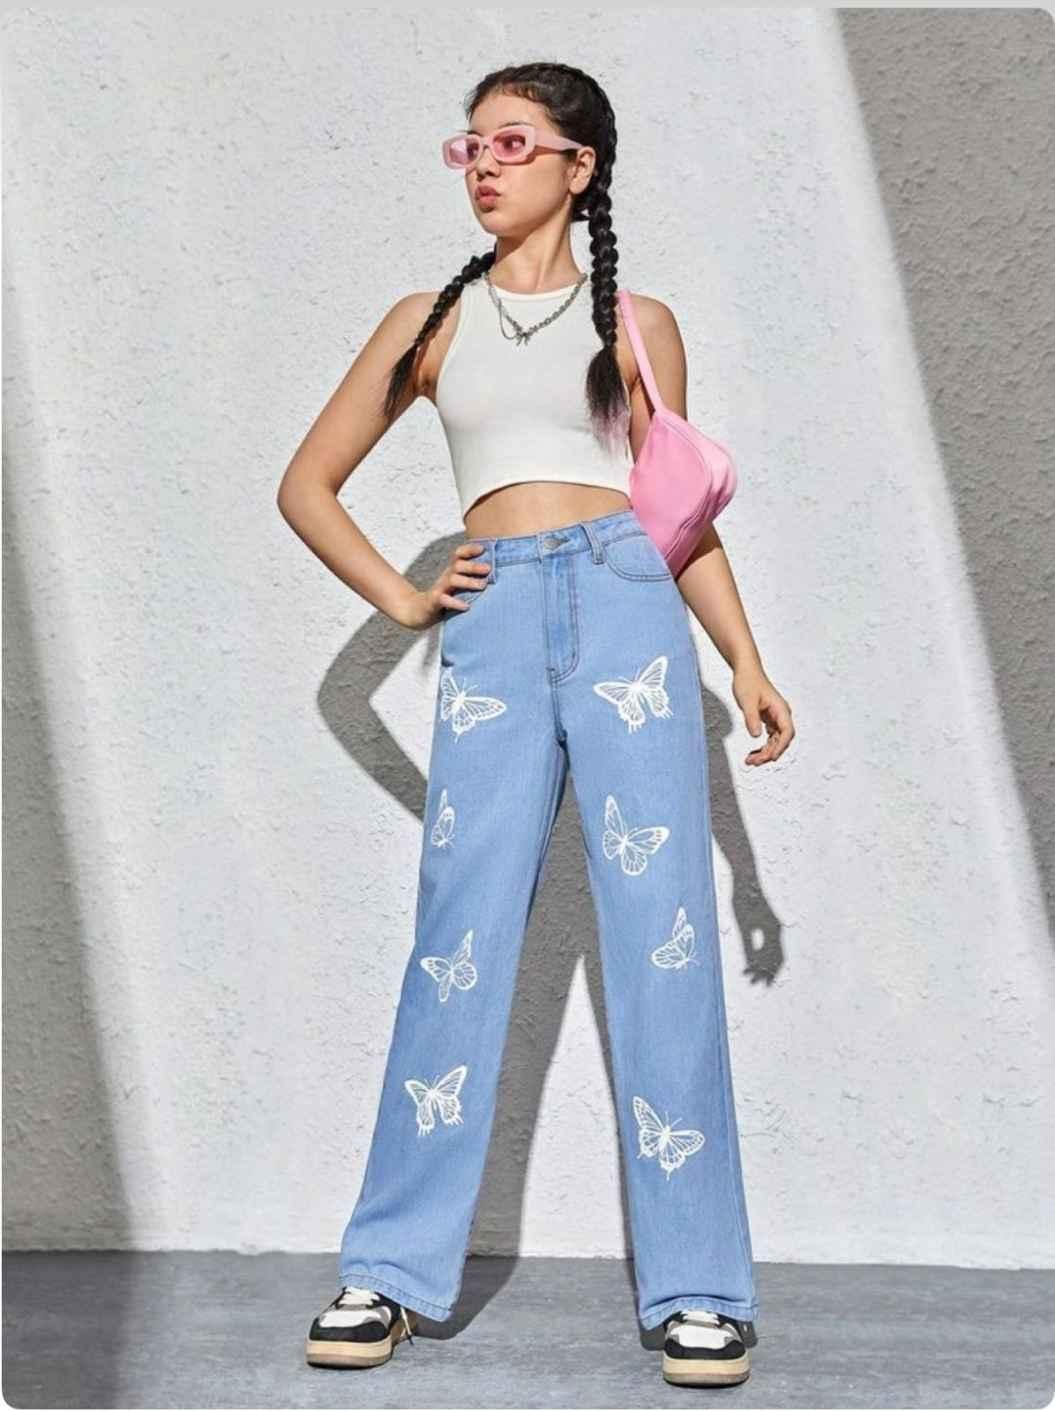 Butterfly Printed Hige Rise Ice Jeans For Women's